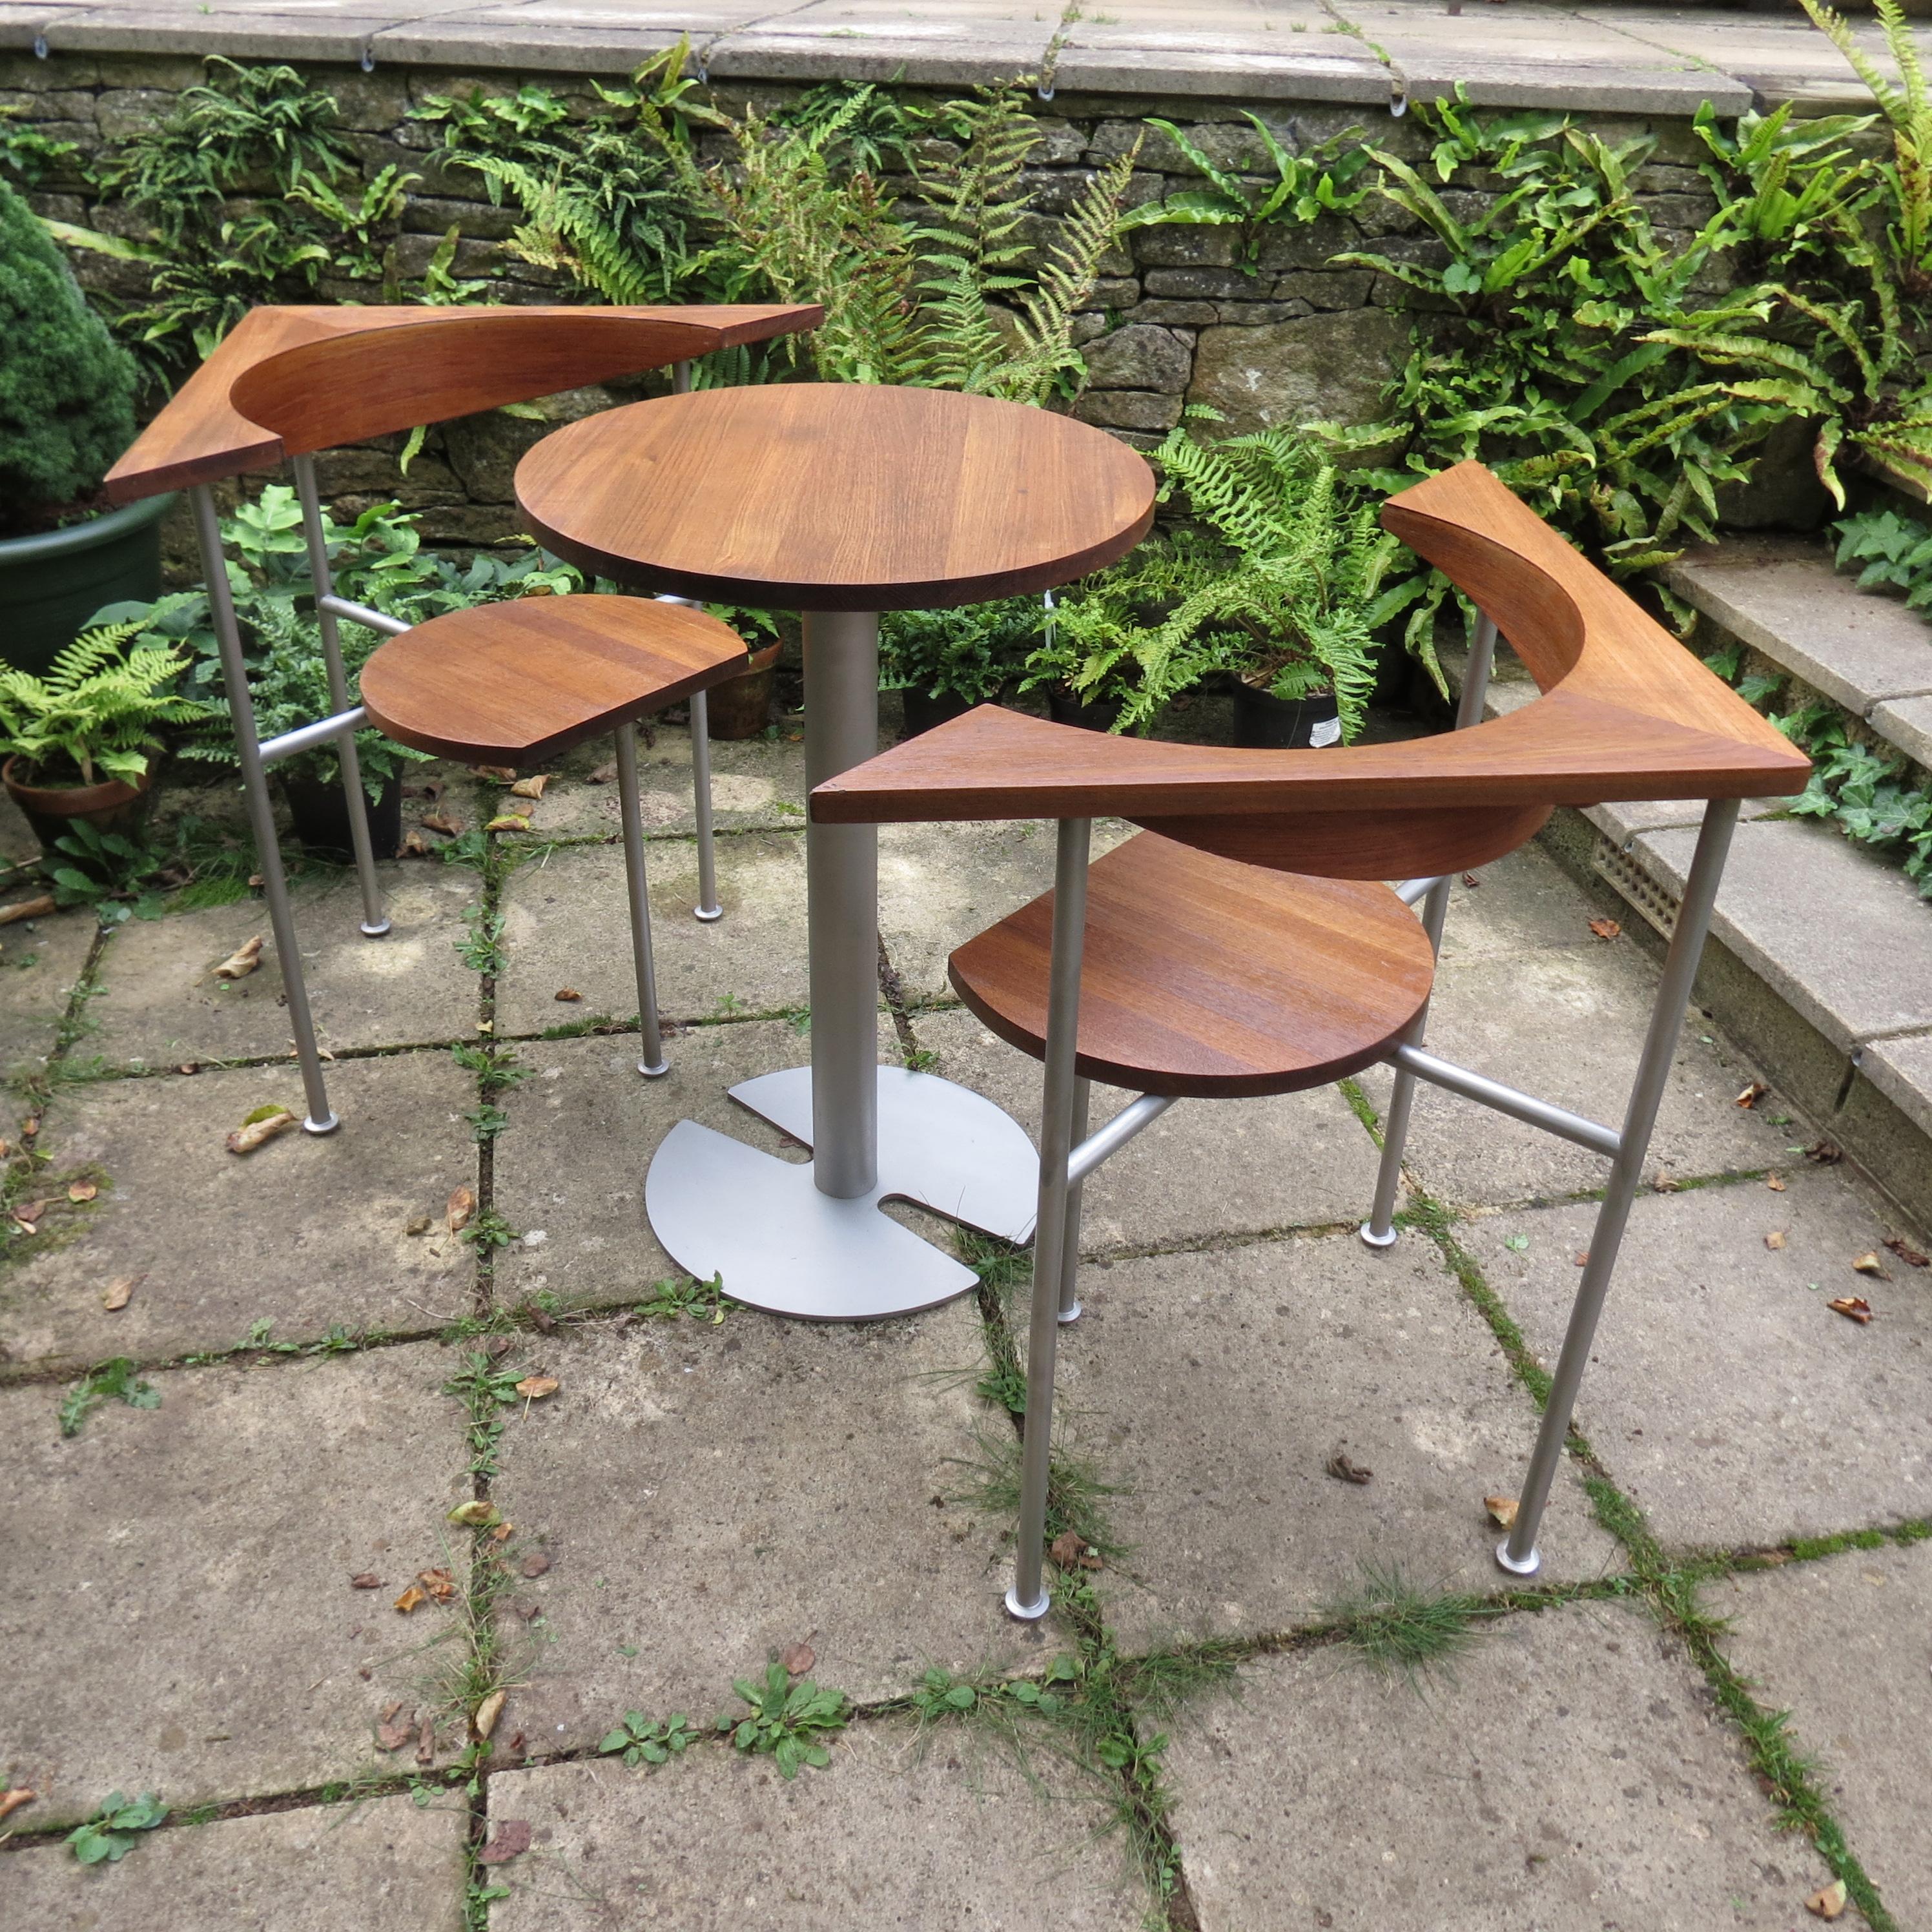 Steel Listers Luytens Teak Tea for Two Bistro Set Atlantis Garden Table and Chairs